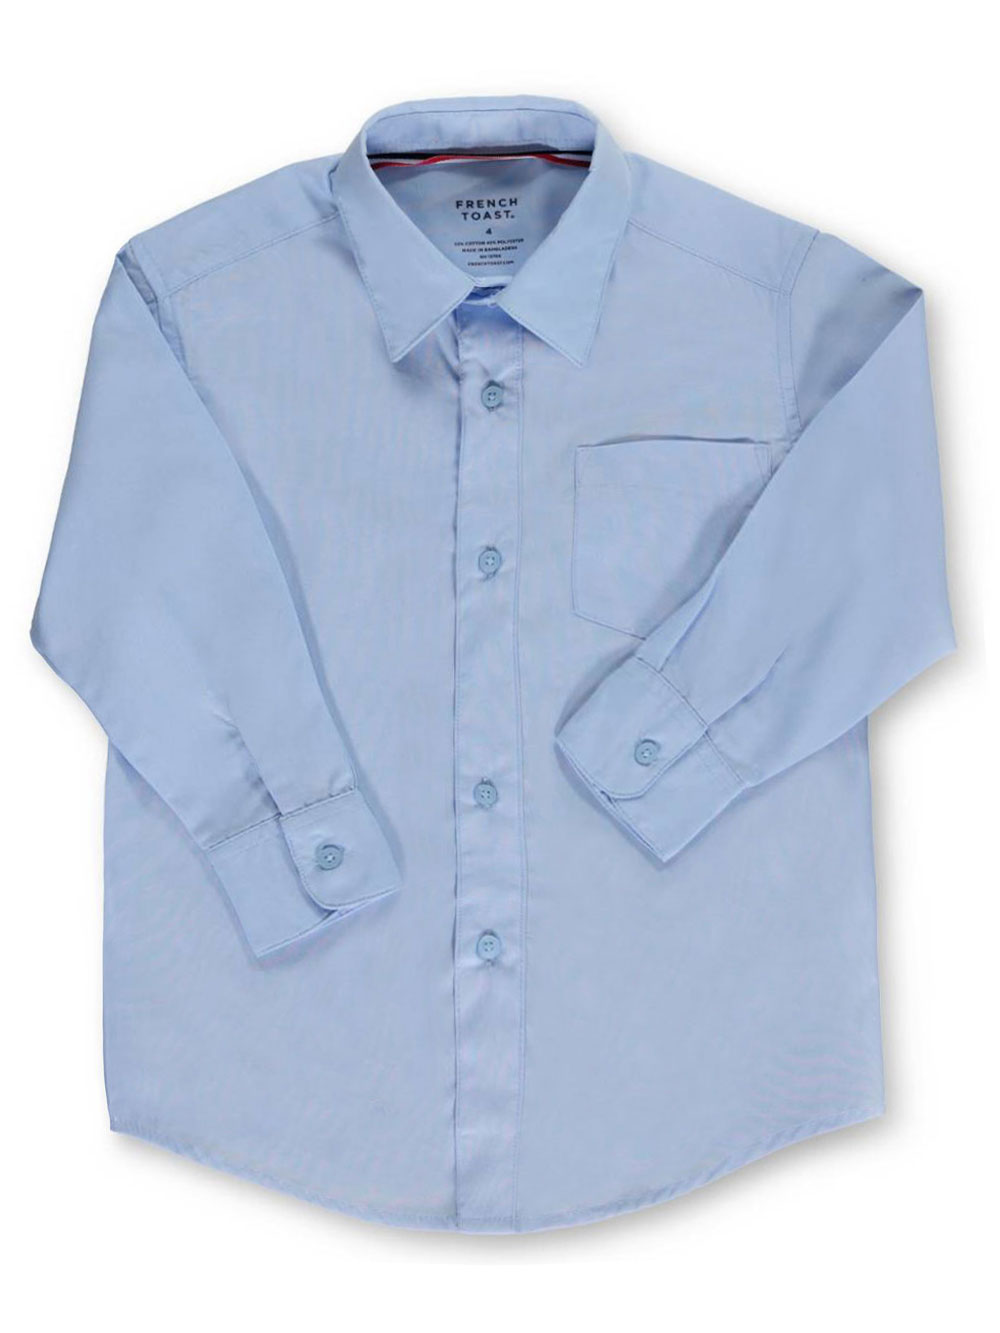 Size 6 Button-Downs for Boys